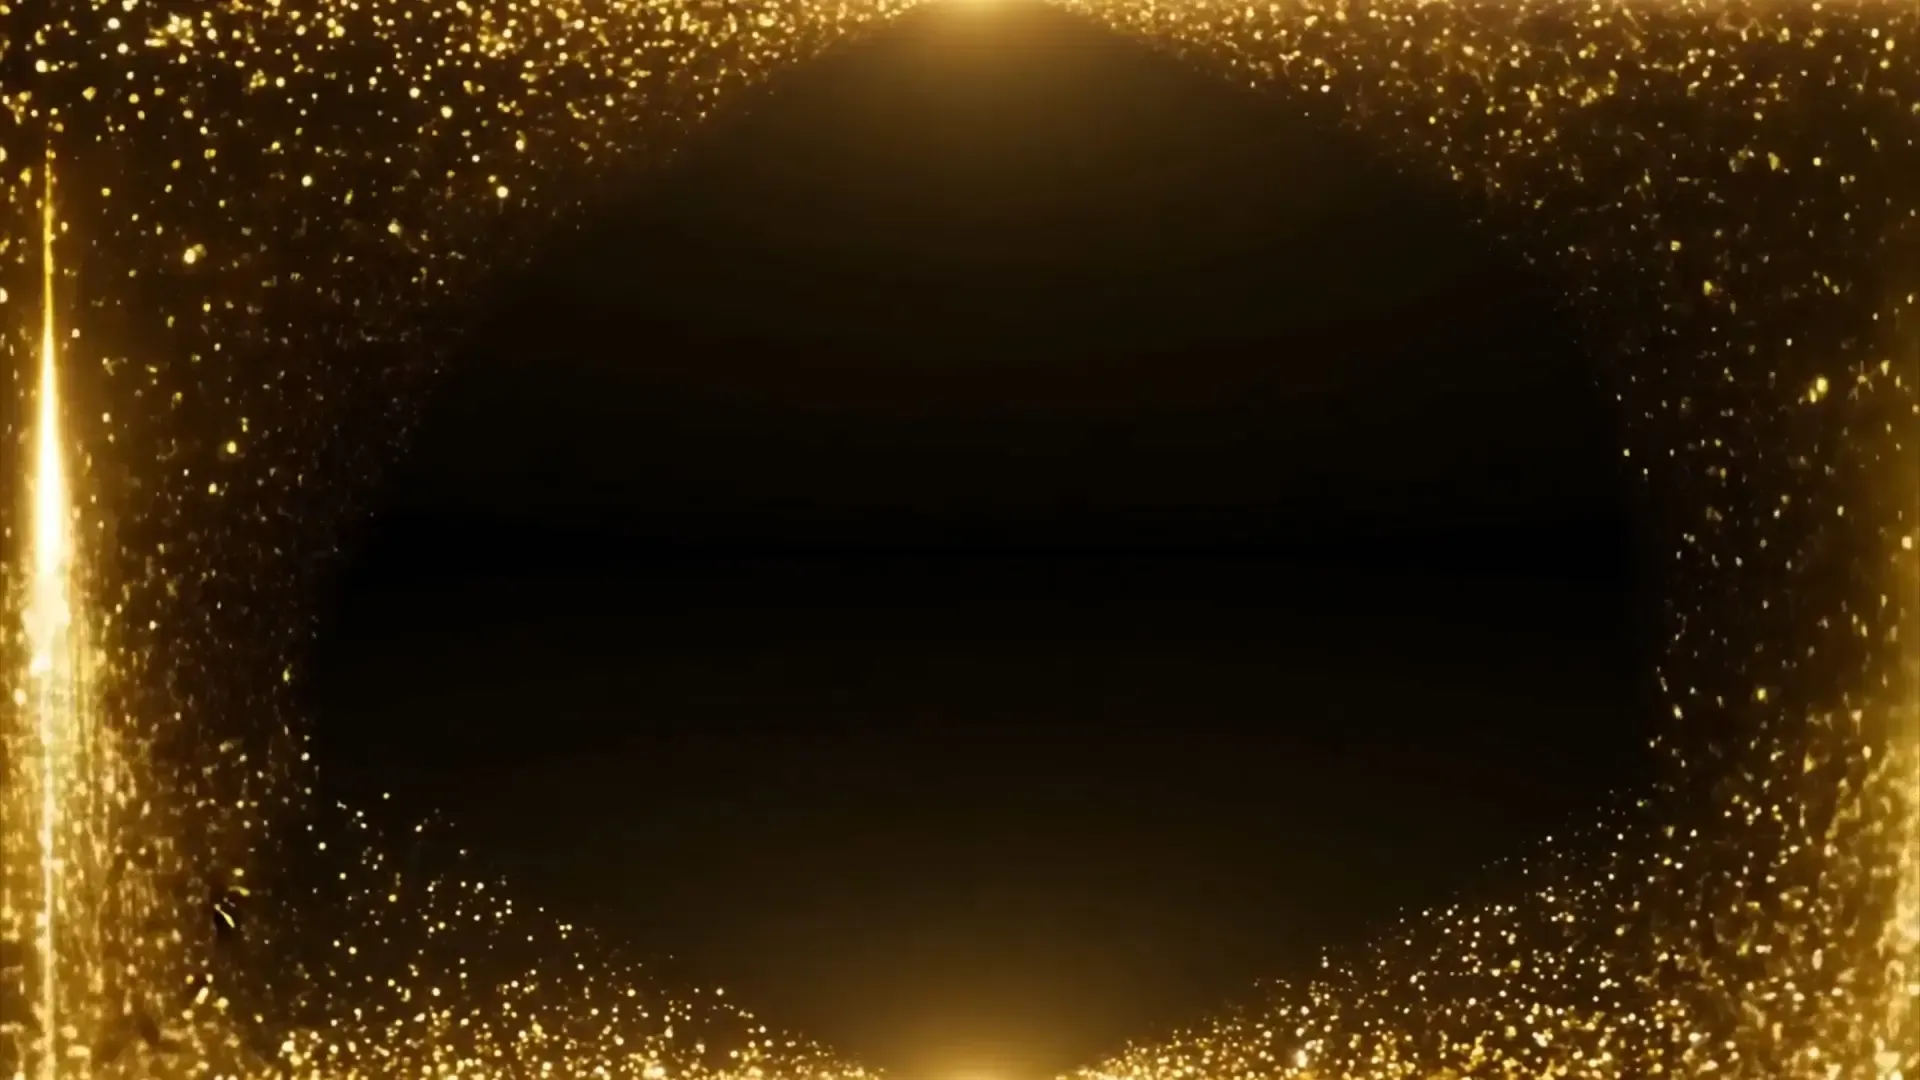 Elegant Gold Particles Loop High-Quality Overlay for Special Events